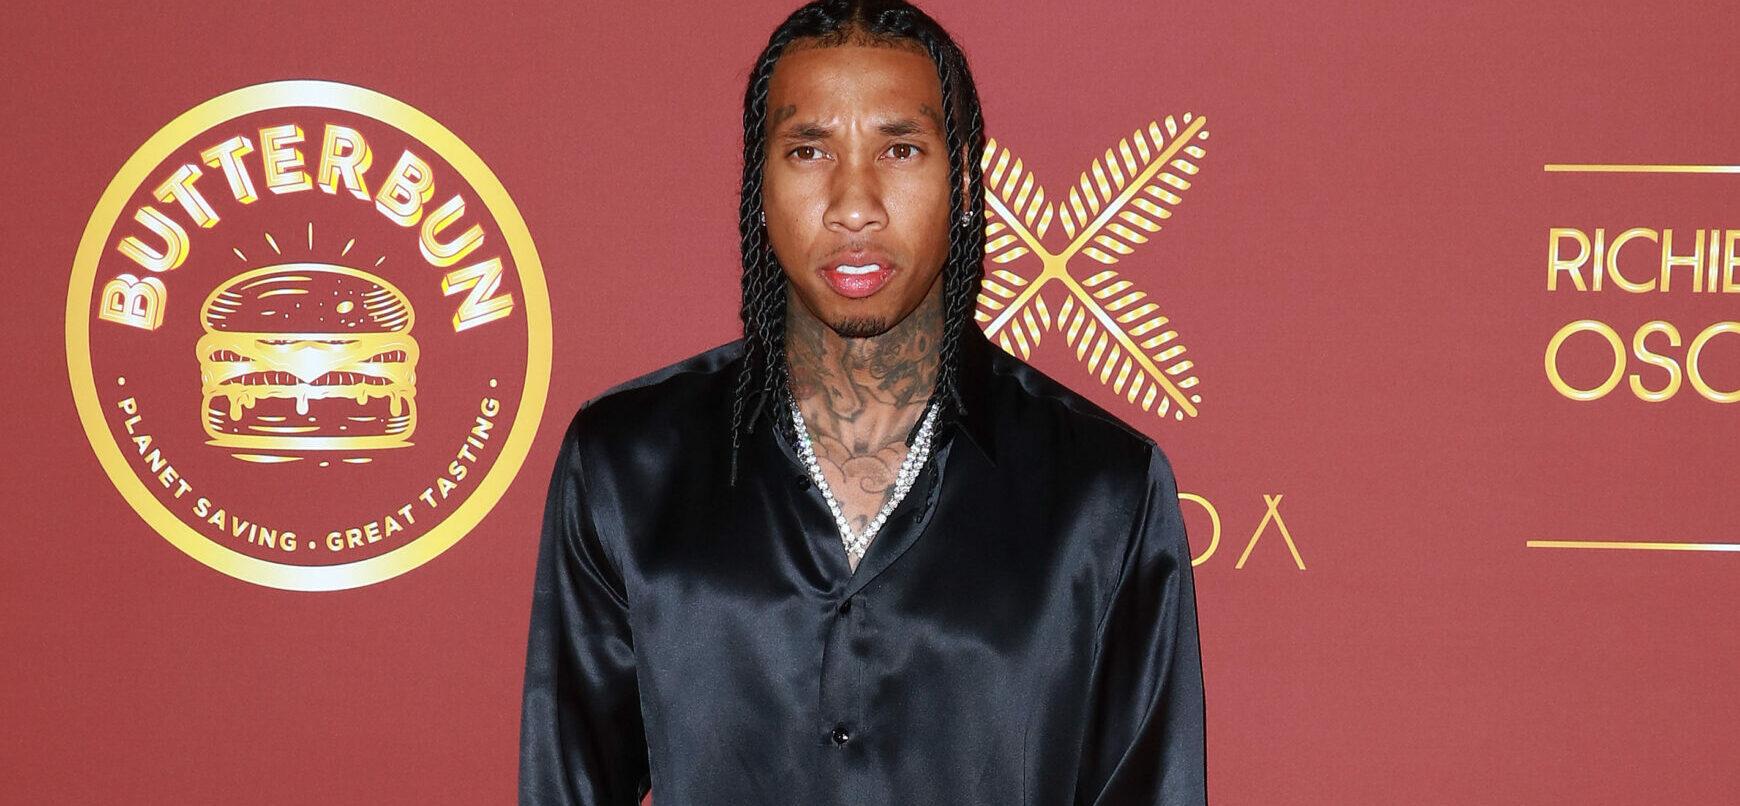 Rapper Tyga Sued Over Bailing On $500,000 NFT Project